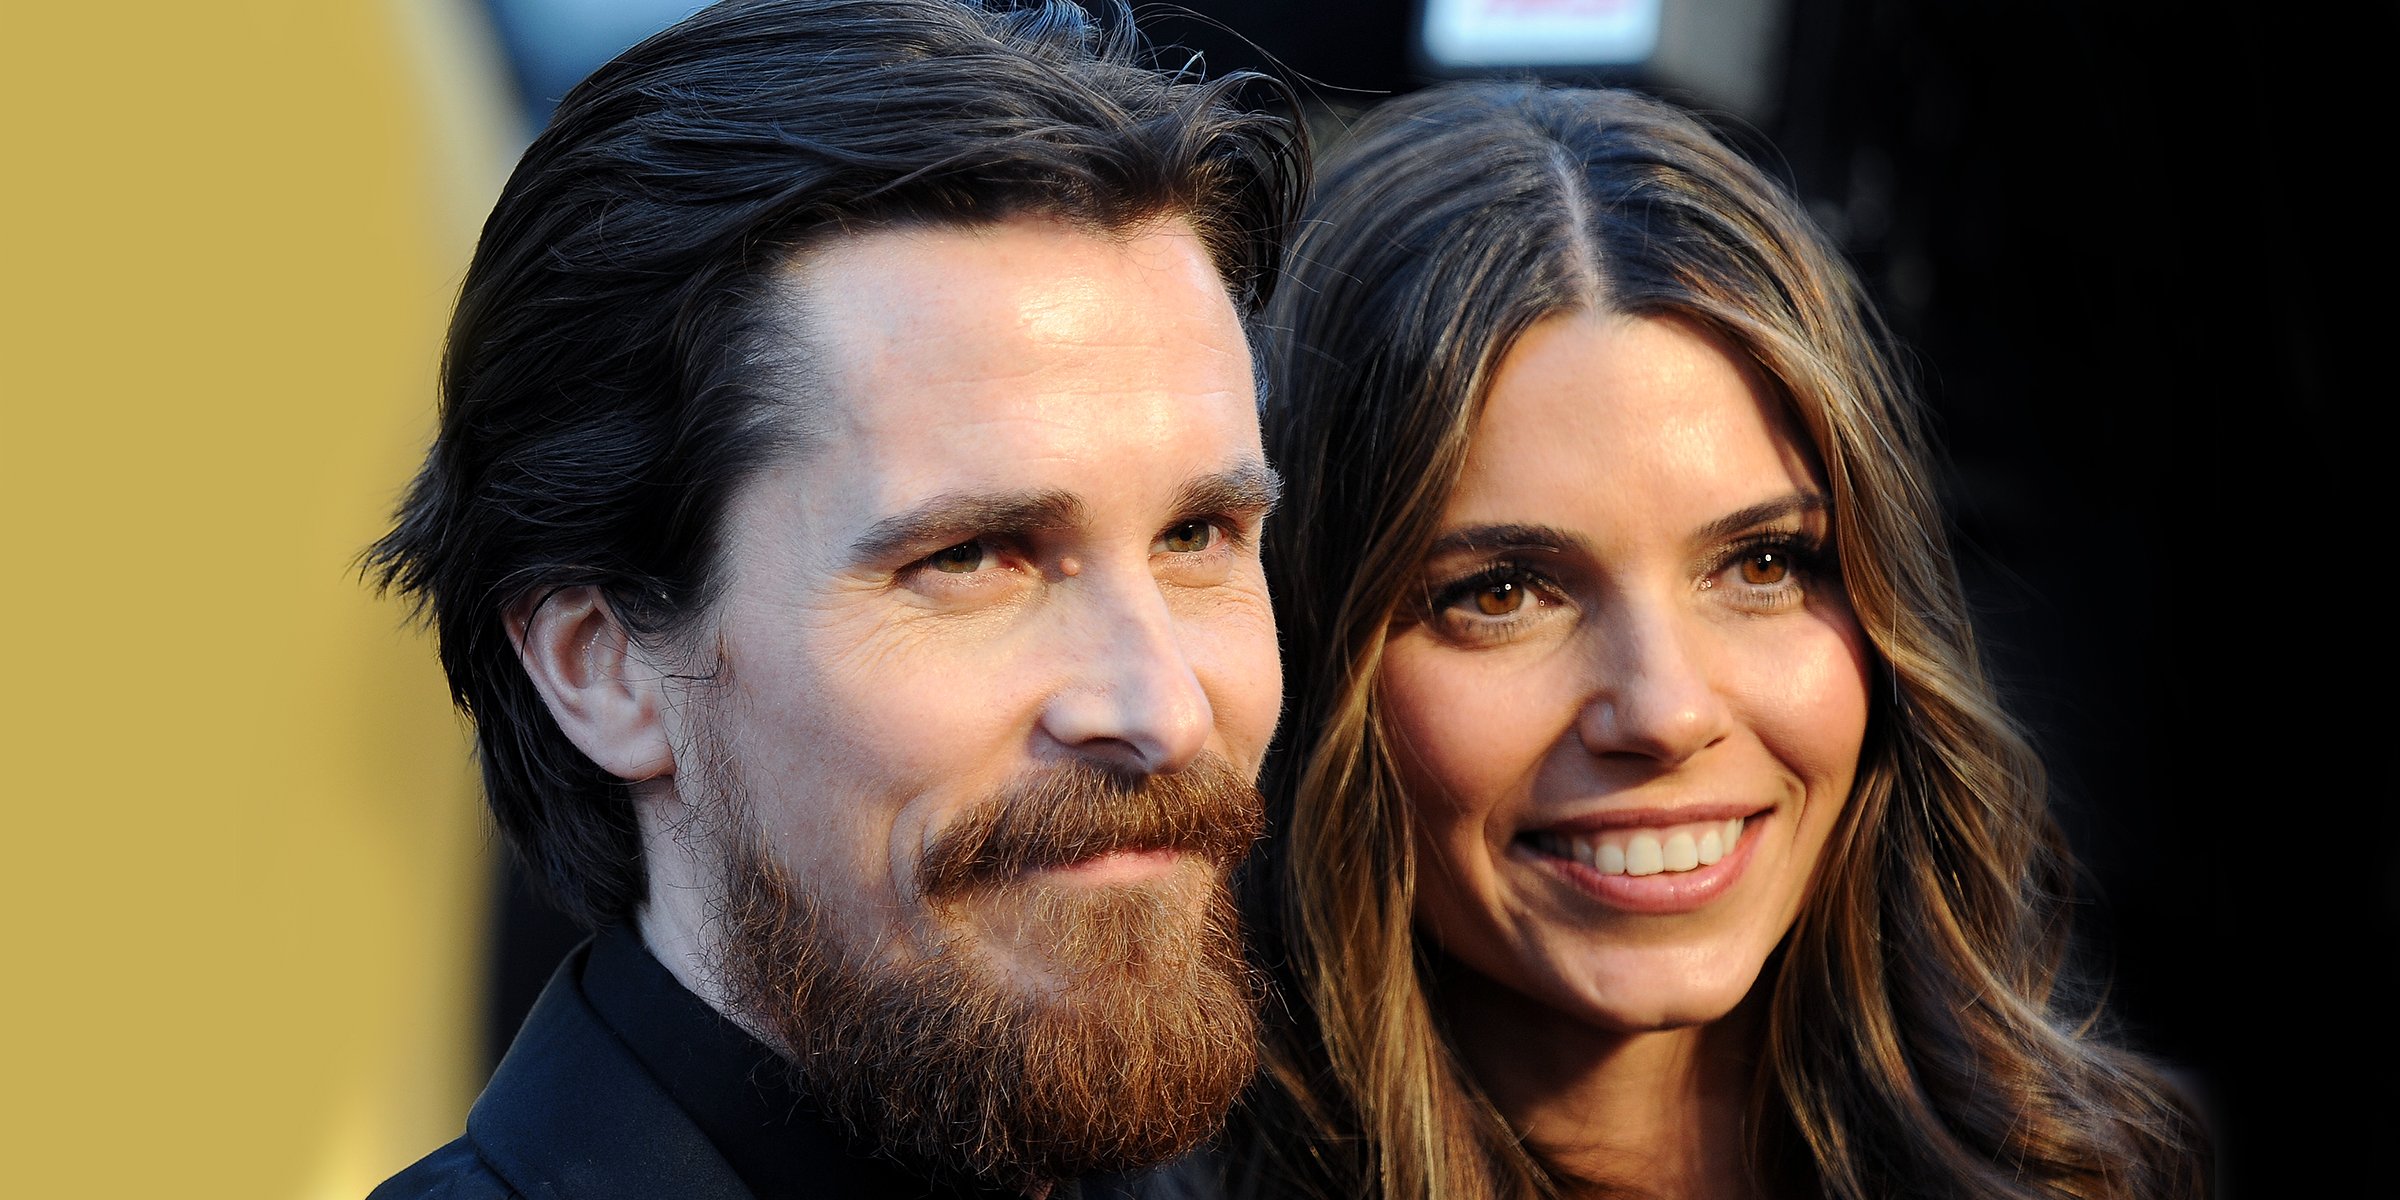 Christian Bale and Sibi Blažić | Source: Getty Images